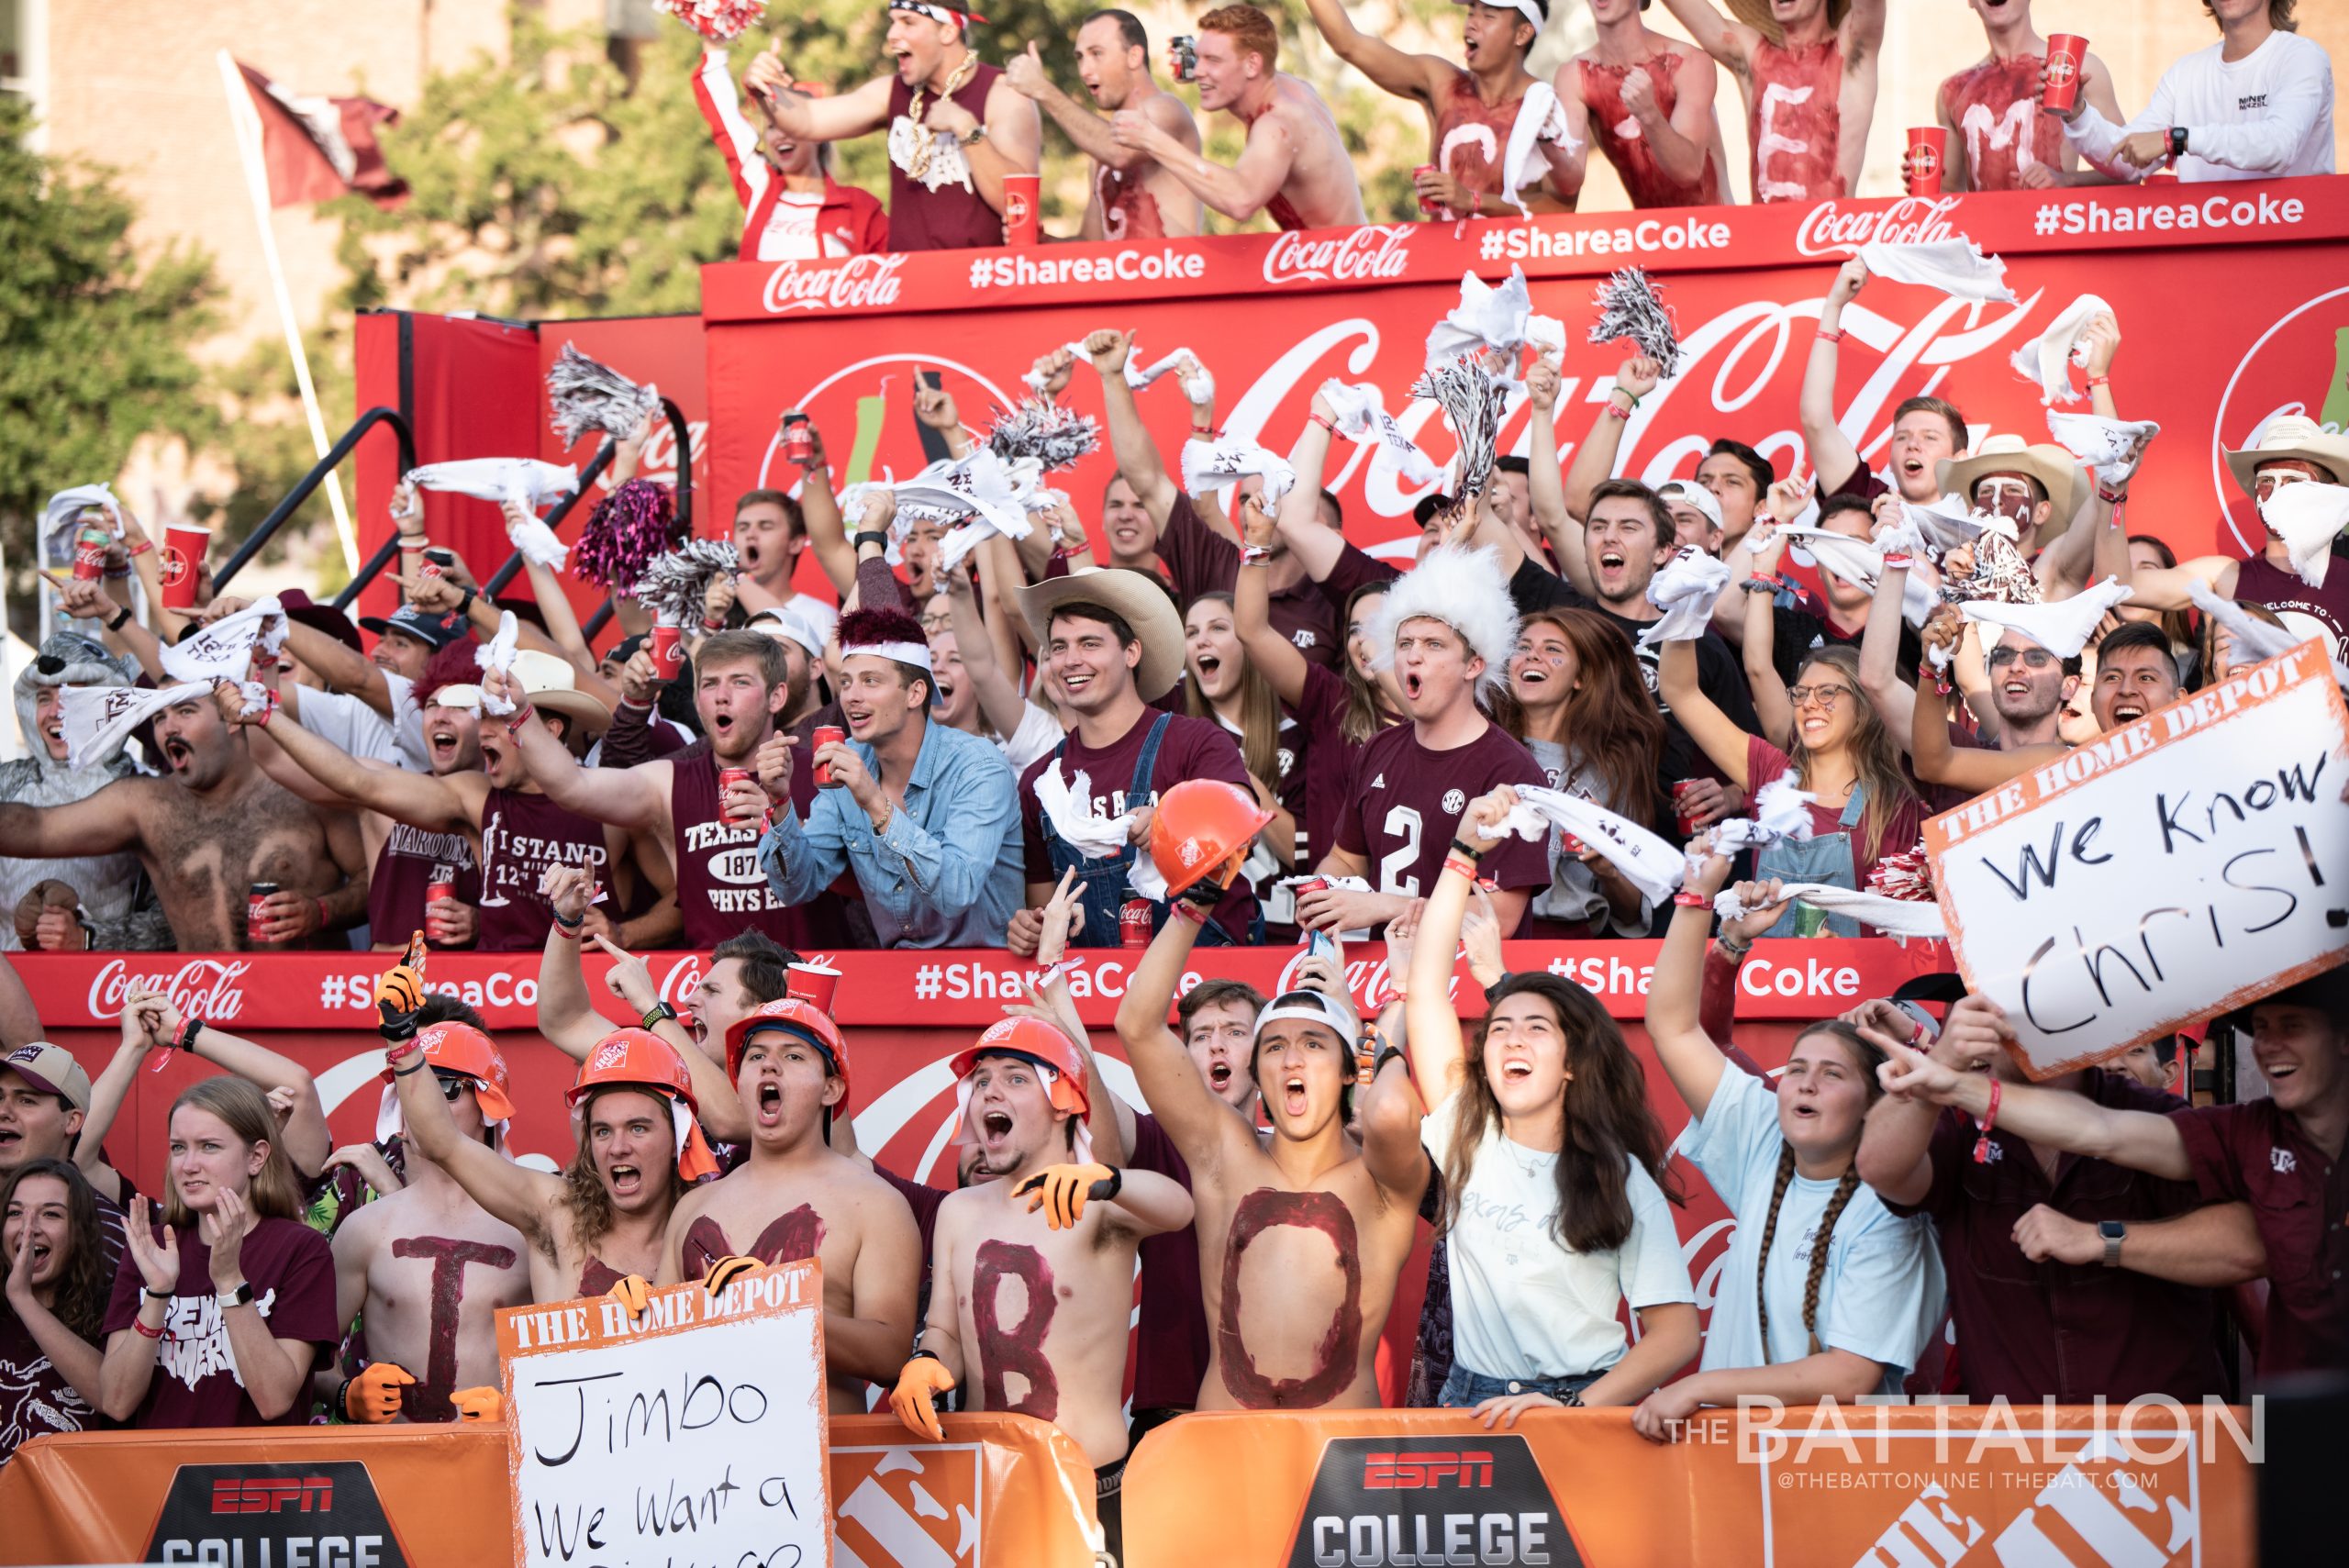 College+GameDay